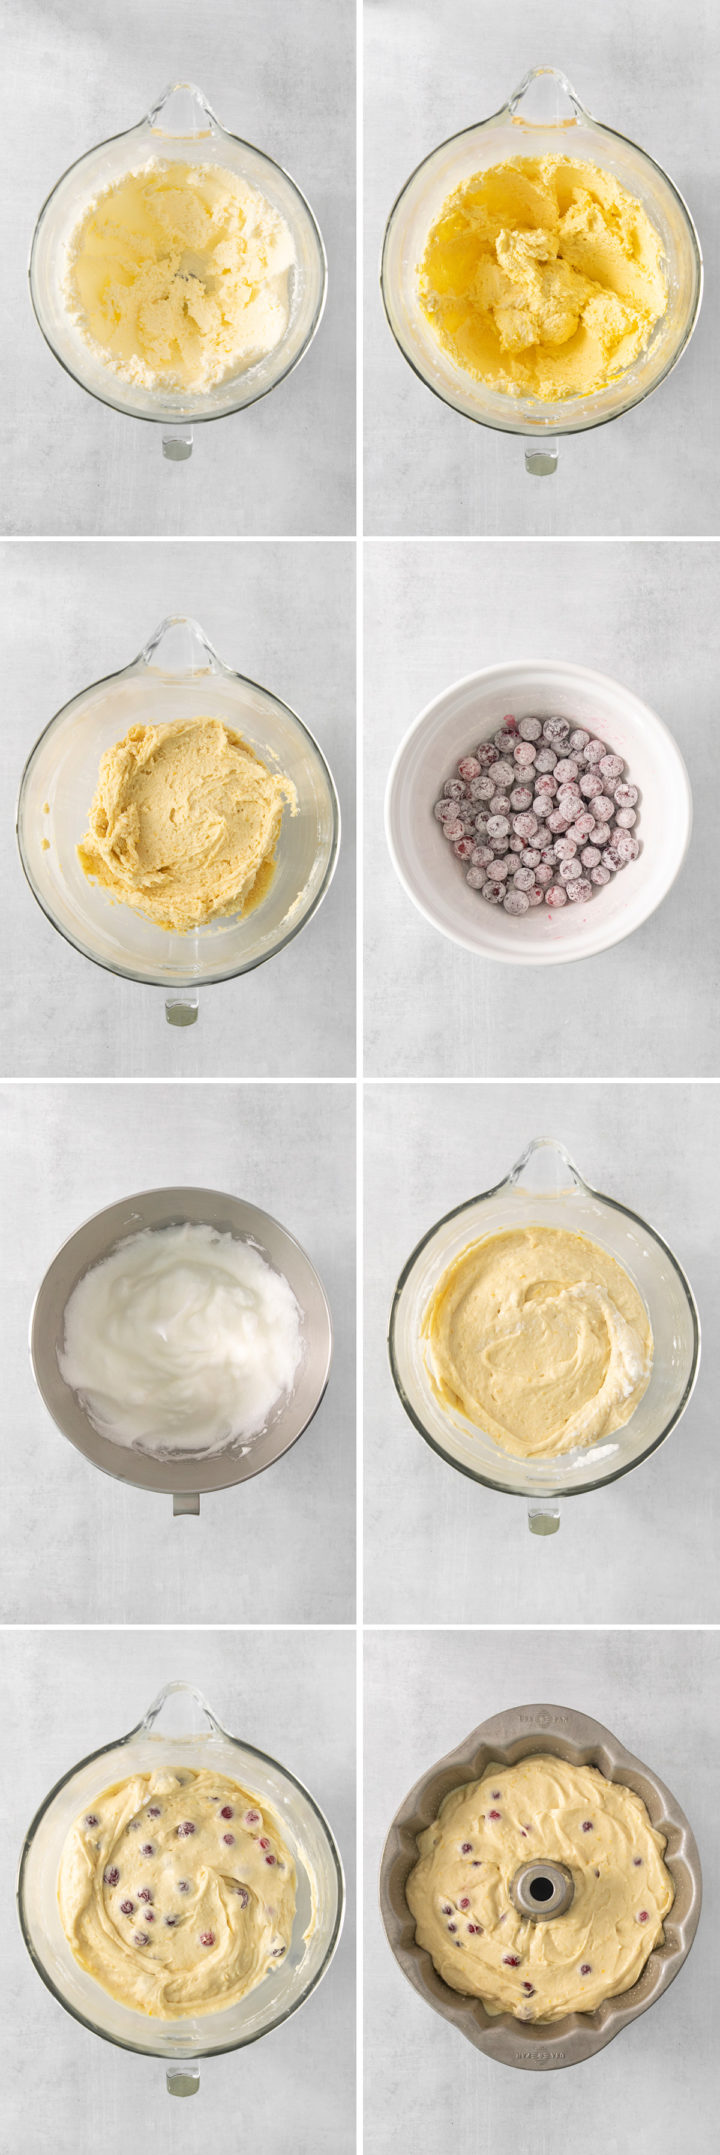 step by step photos showing how to make a cranberry orange cake